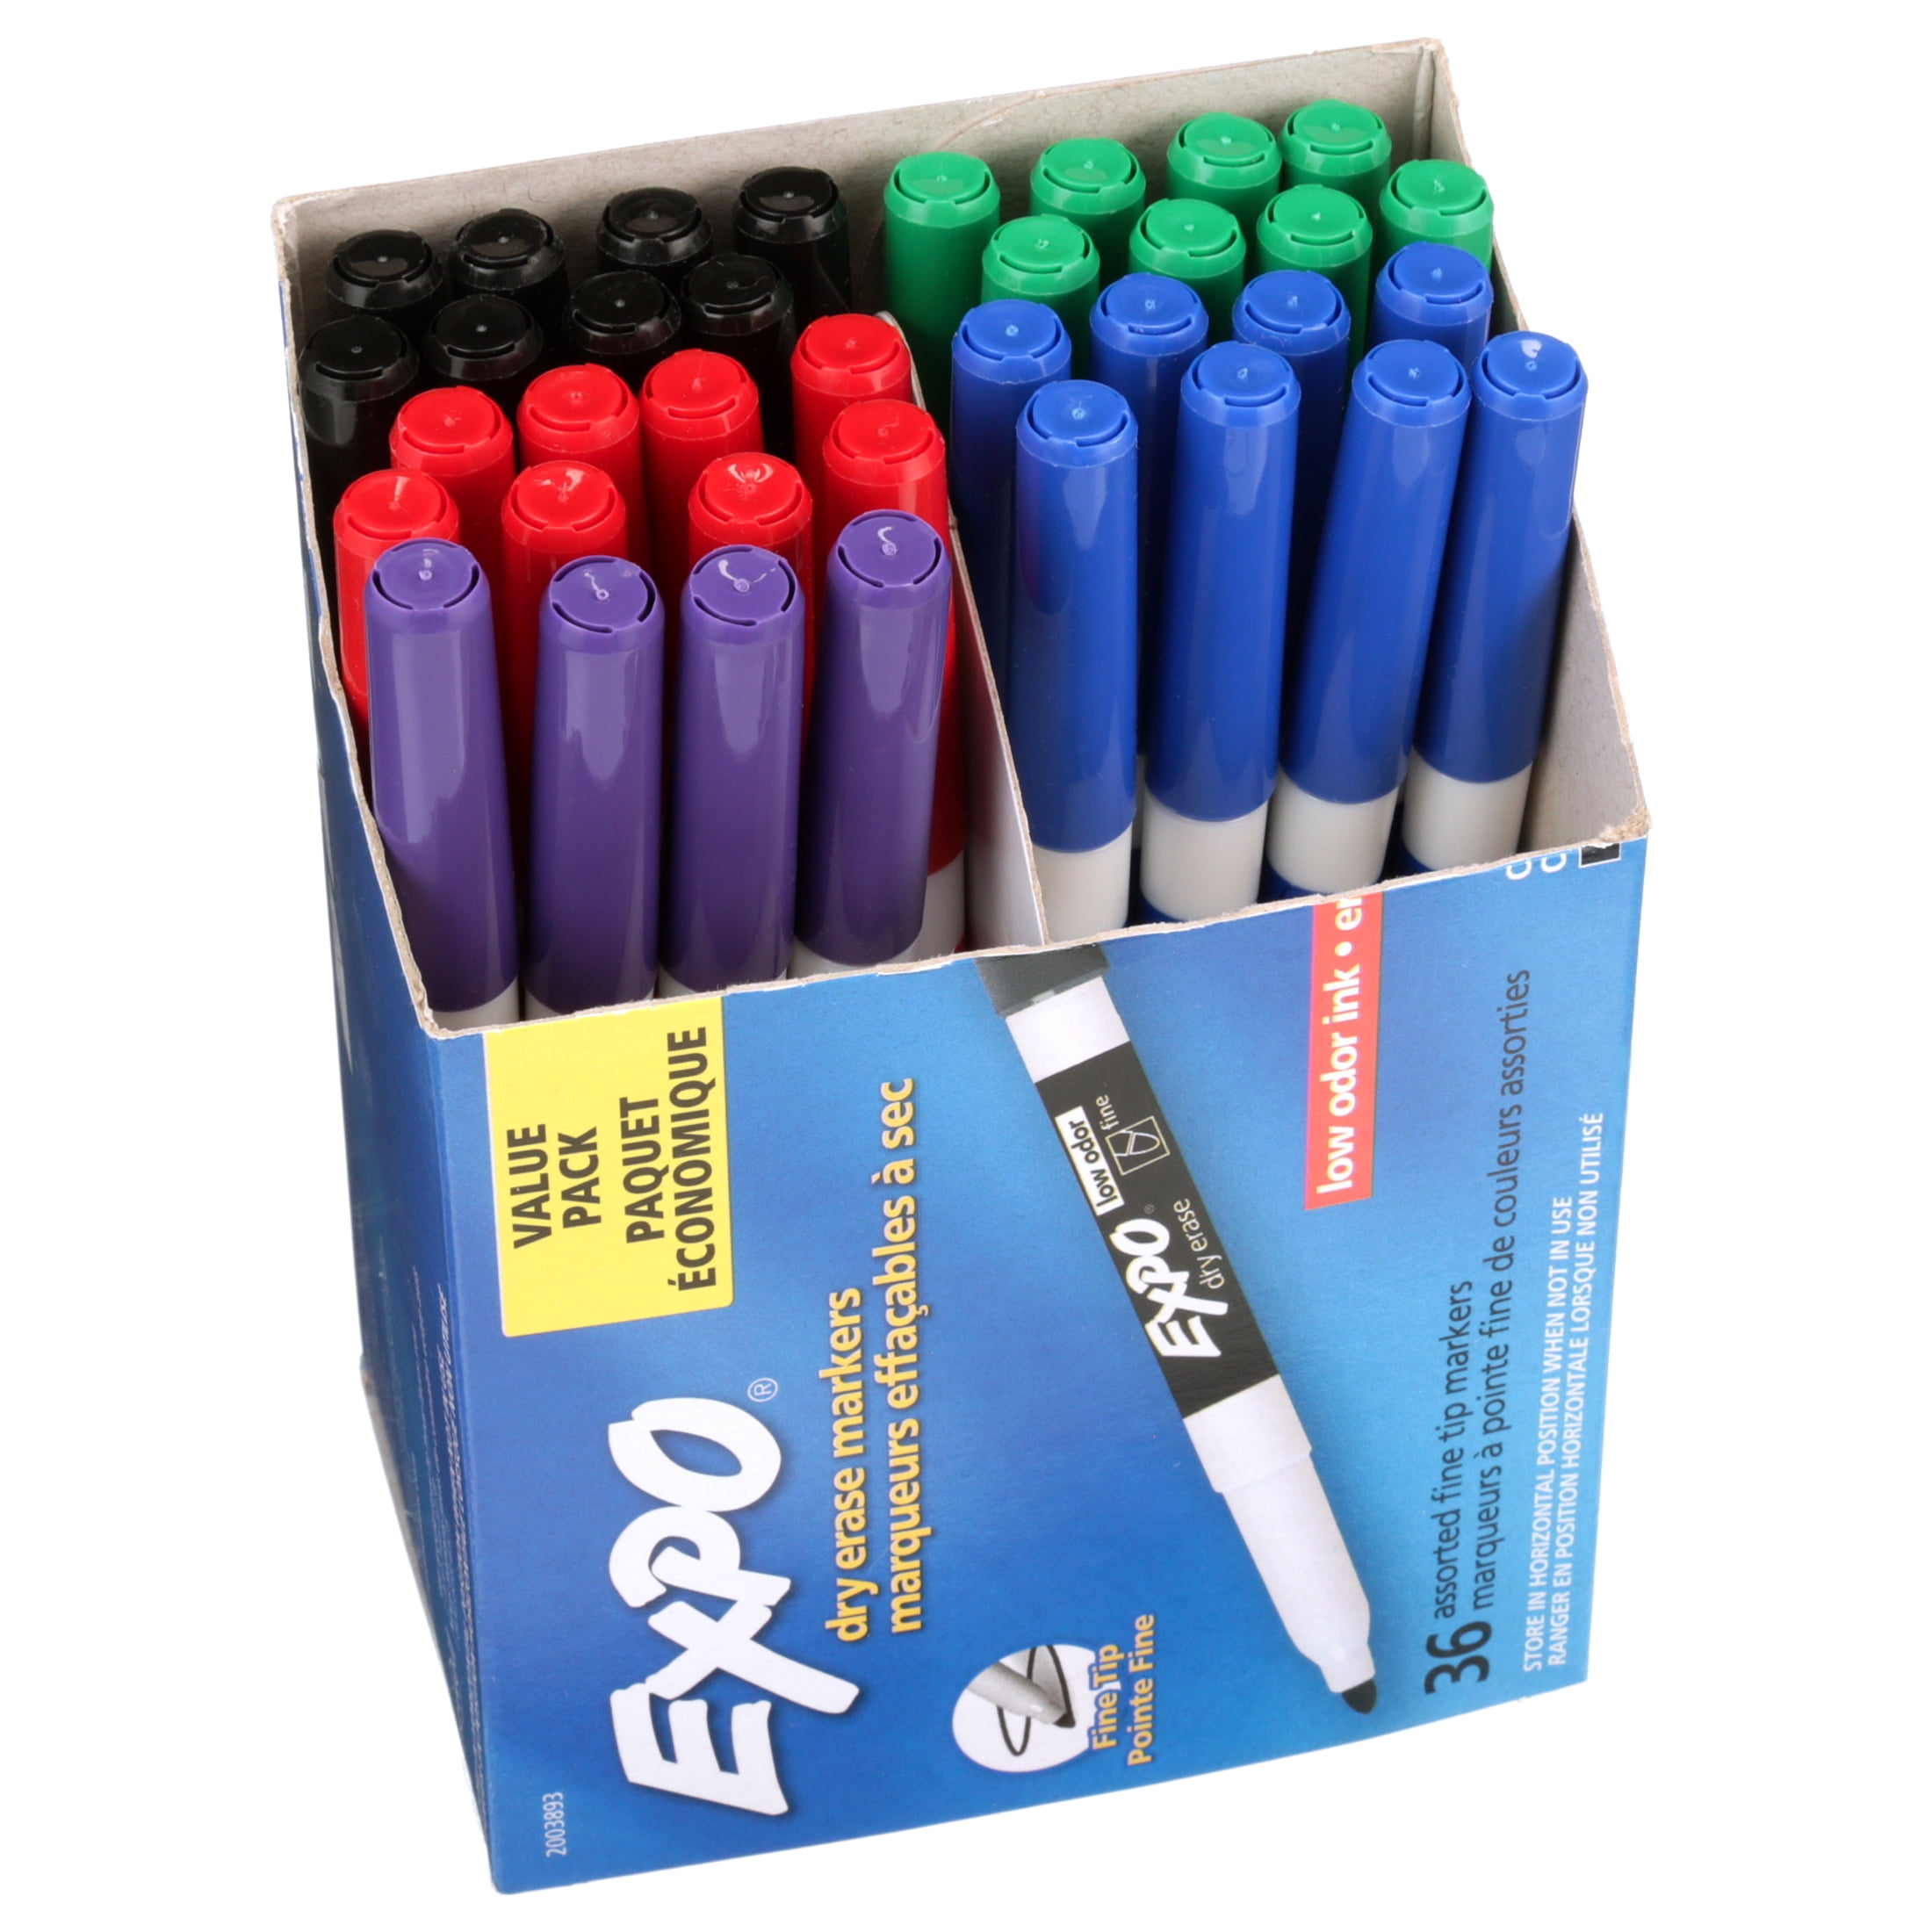 EXPO® Click Dry Erase Markers, Fine Tip, Assorted, 6 per